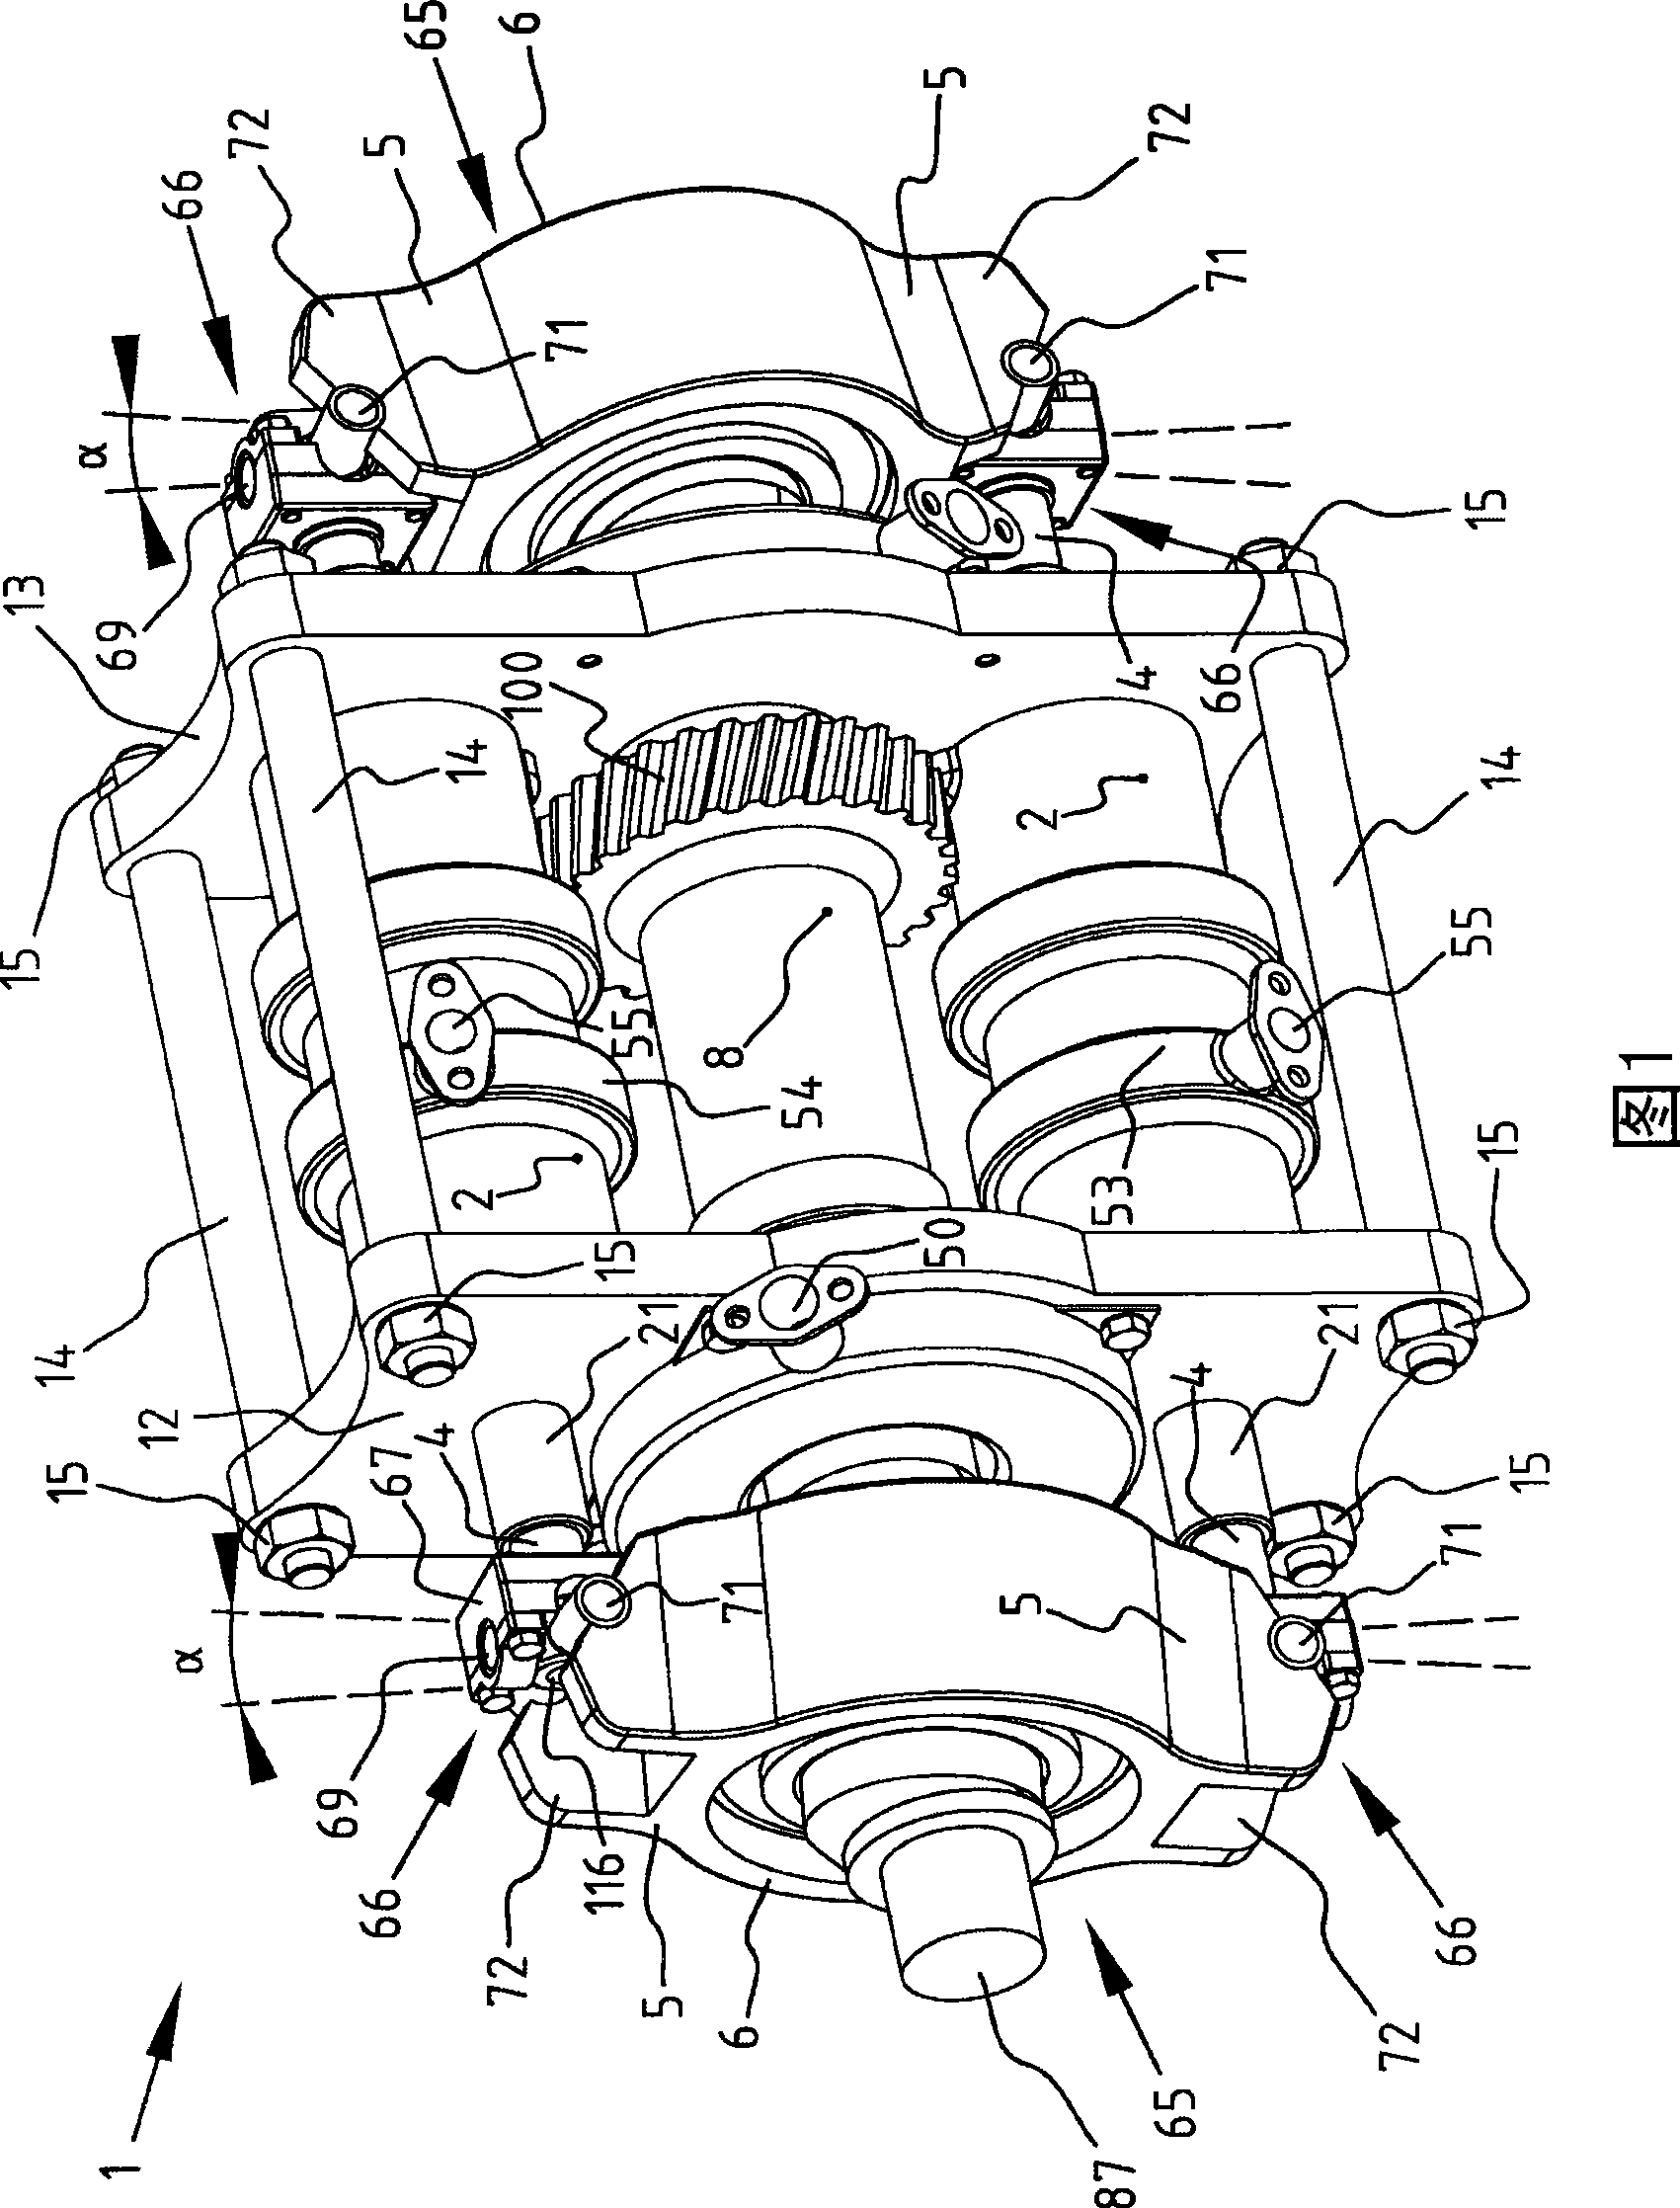 Internal combustion engine with variable compression ratio